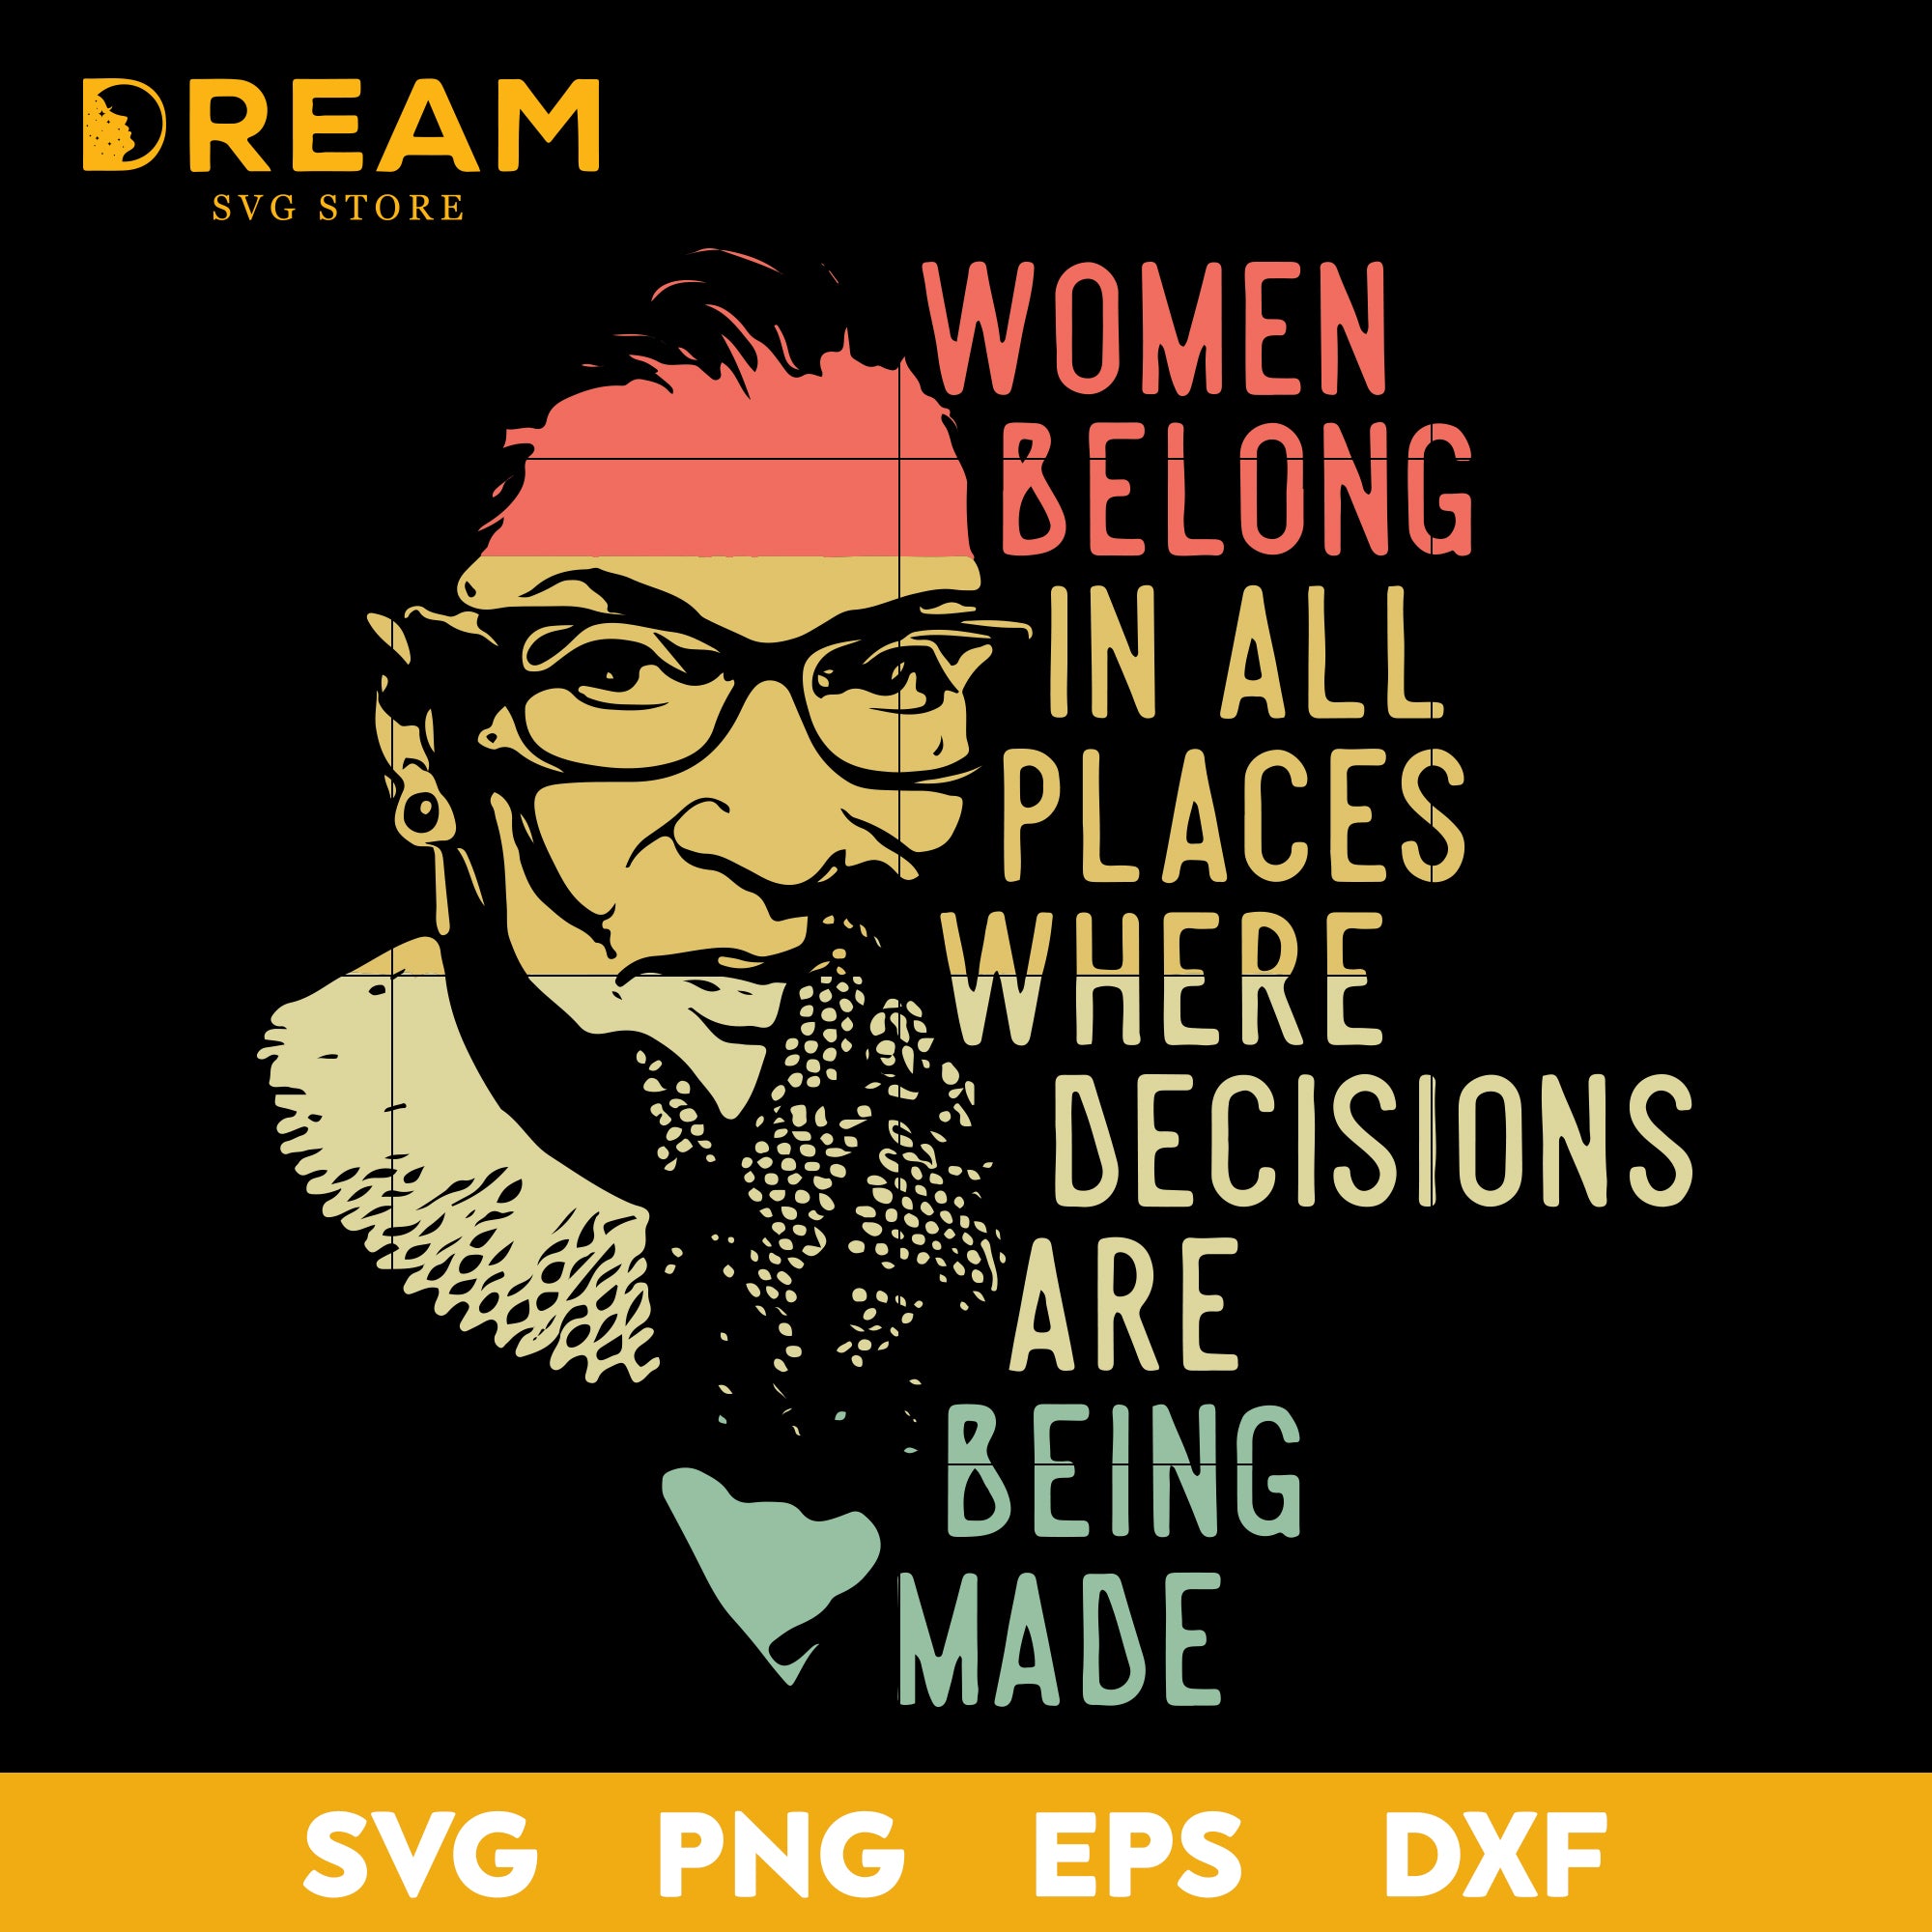 Download Women Belong In All Places Where Decisions Are Being Made Svg Ruth Ba Dreamsvg Store